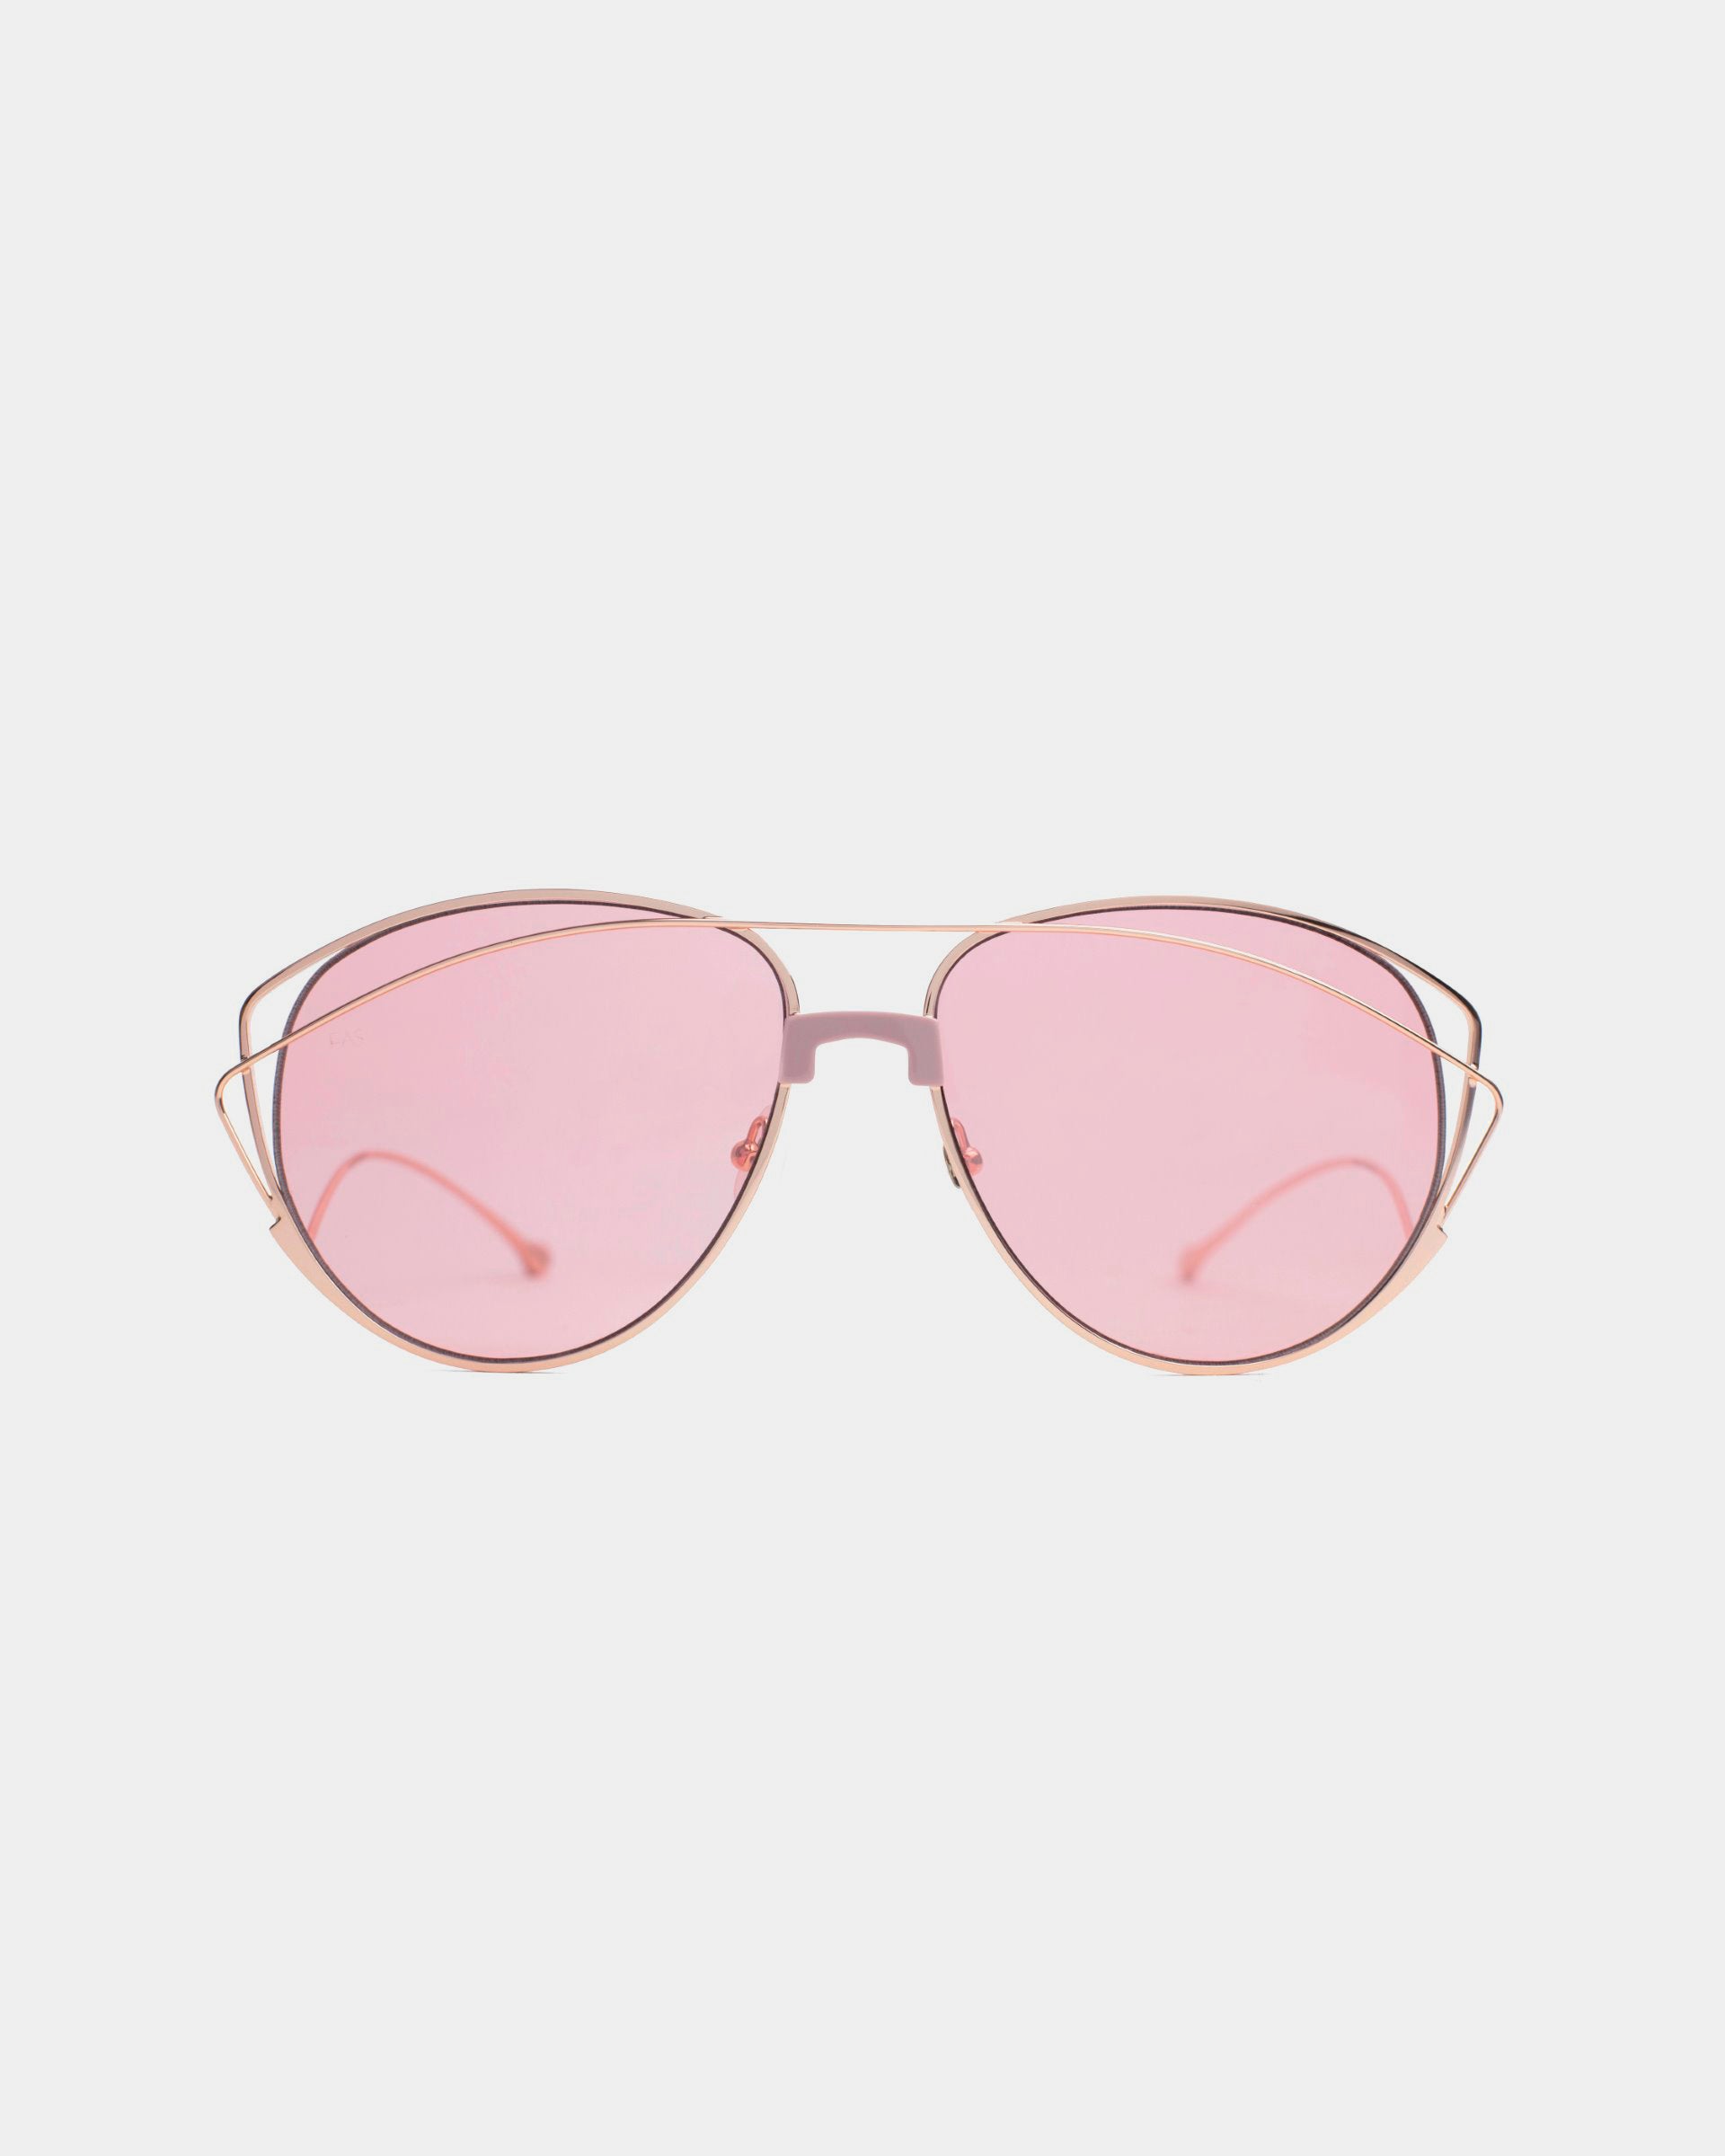 A pair of stylish For Art&#39;s Sake® Dark Eyes sunglasses with pink-tinted nylon lenses and gold stainless steel frames. The design features a double bridge and thin, curved temples, offering 100% UV protection. The background is white.